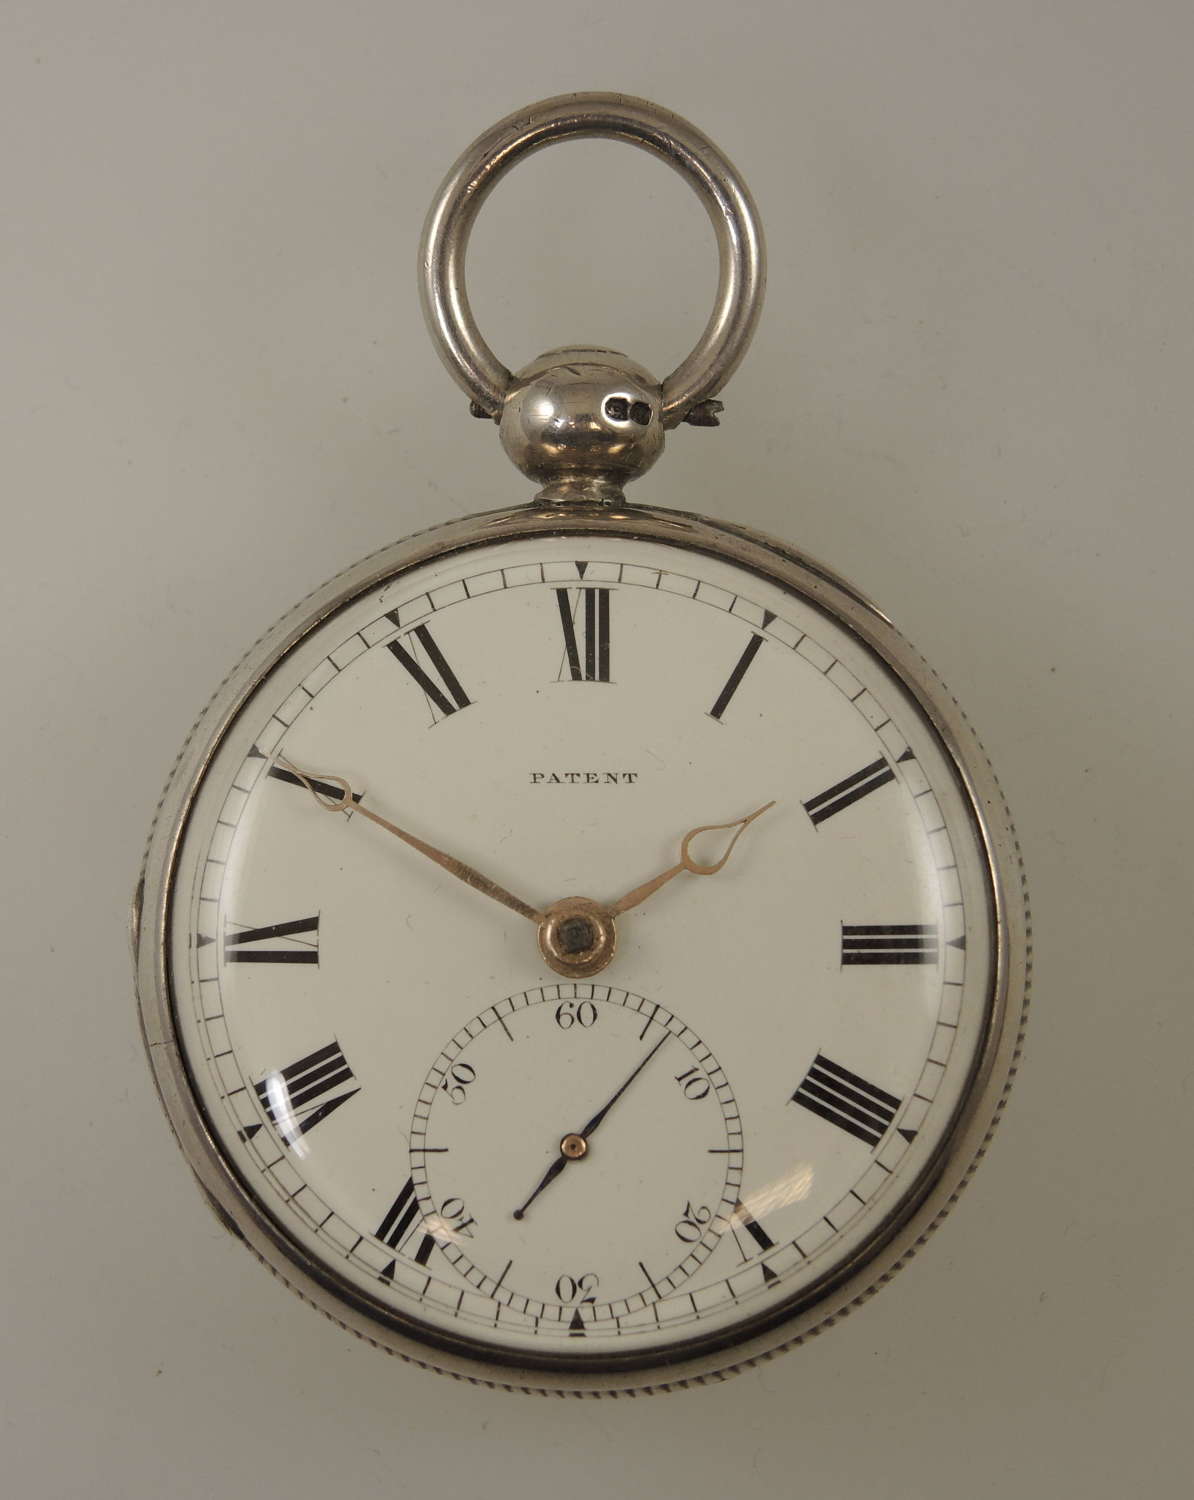 Superb example of an early silver fusee pocket watch. By Lautier, Bath